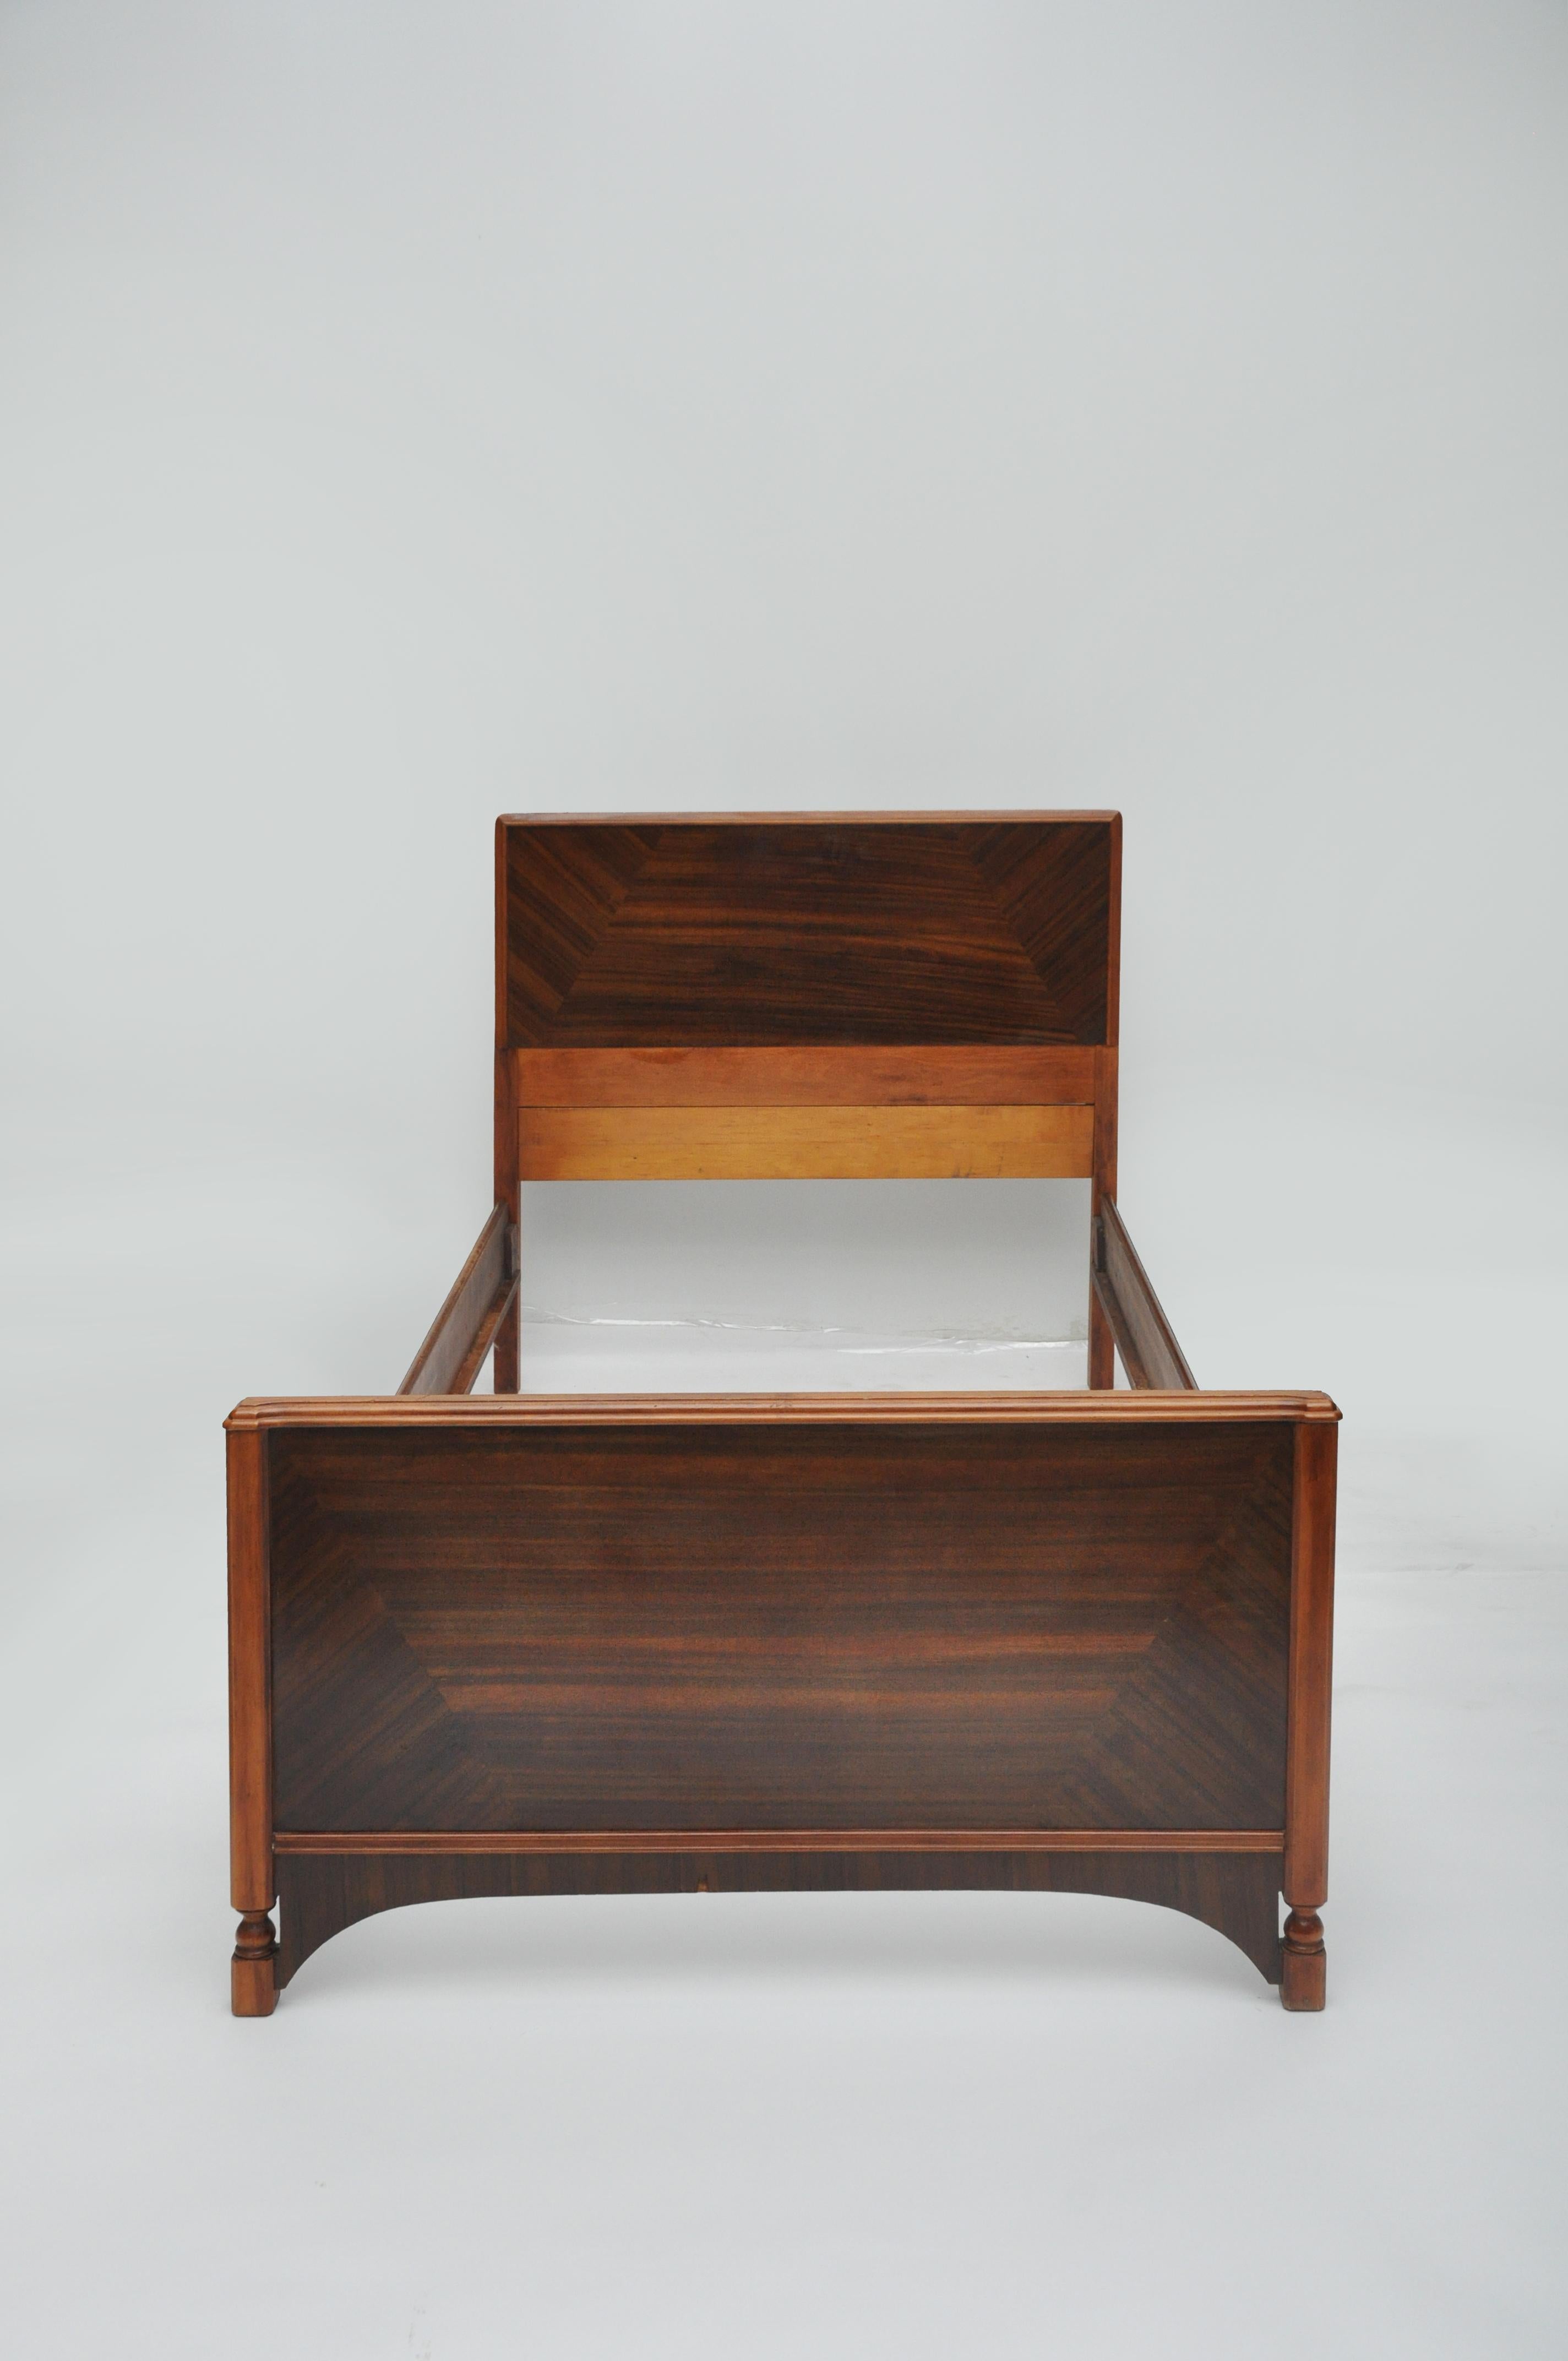 Pair of Mid-Century Modern twin single bed frames. The grain of the wood is fabulous. Length of bed is 87.5